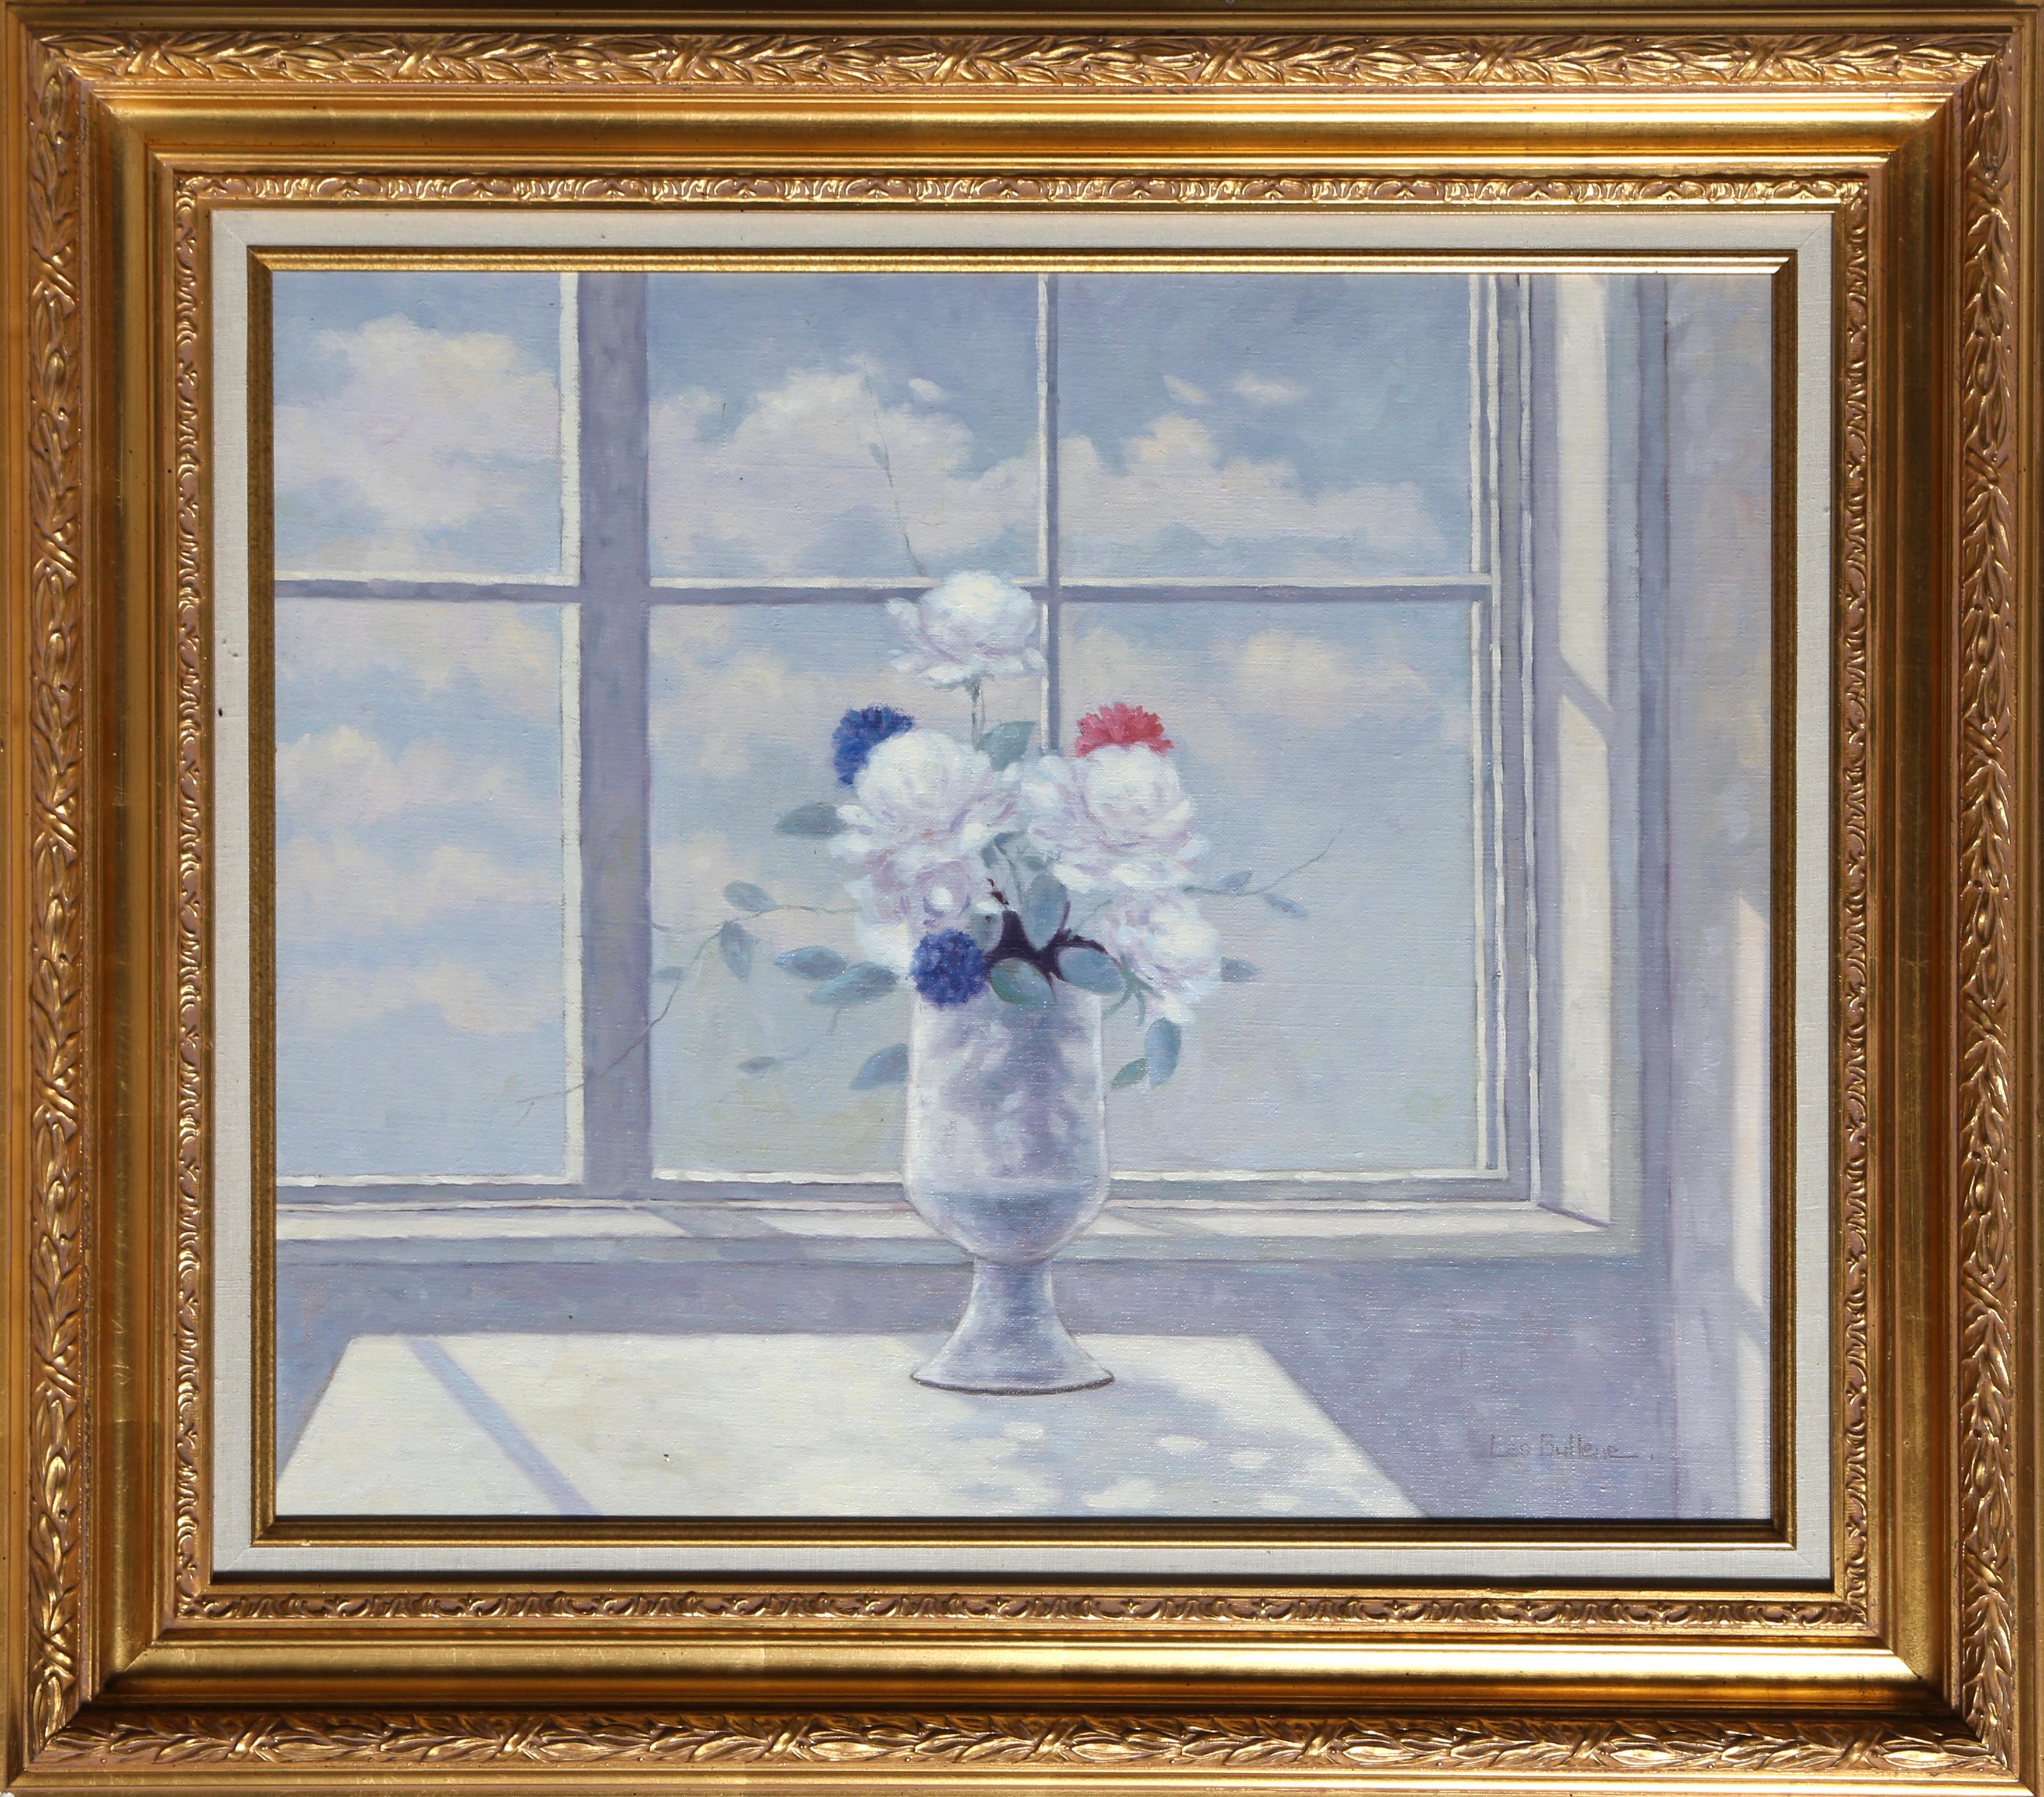 Flower Still Life in front of Window, Oil Painting by Les Bullene